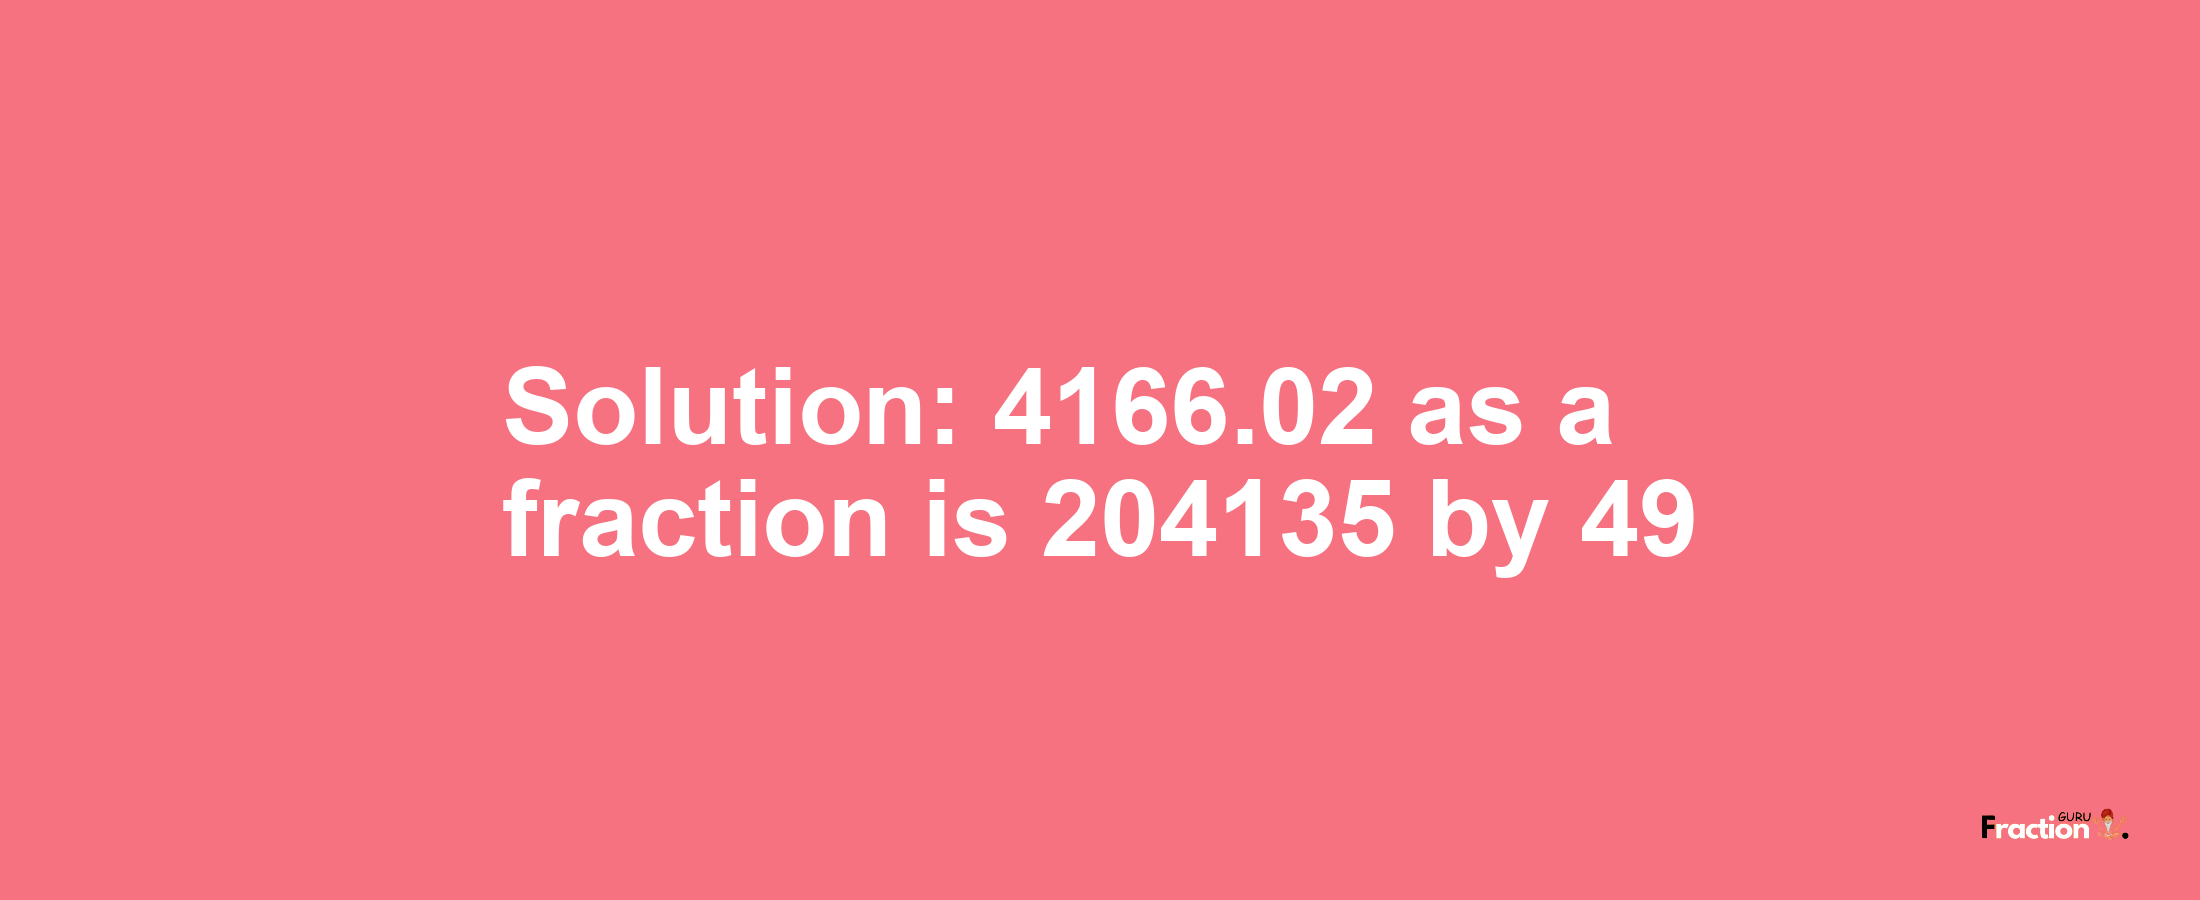 Solution:4166.02 as a fraction is 204135/49